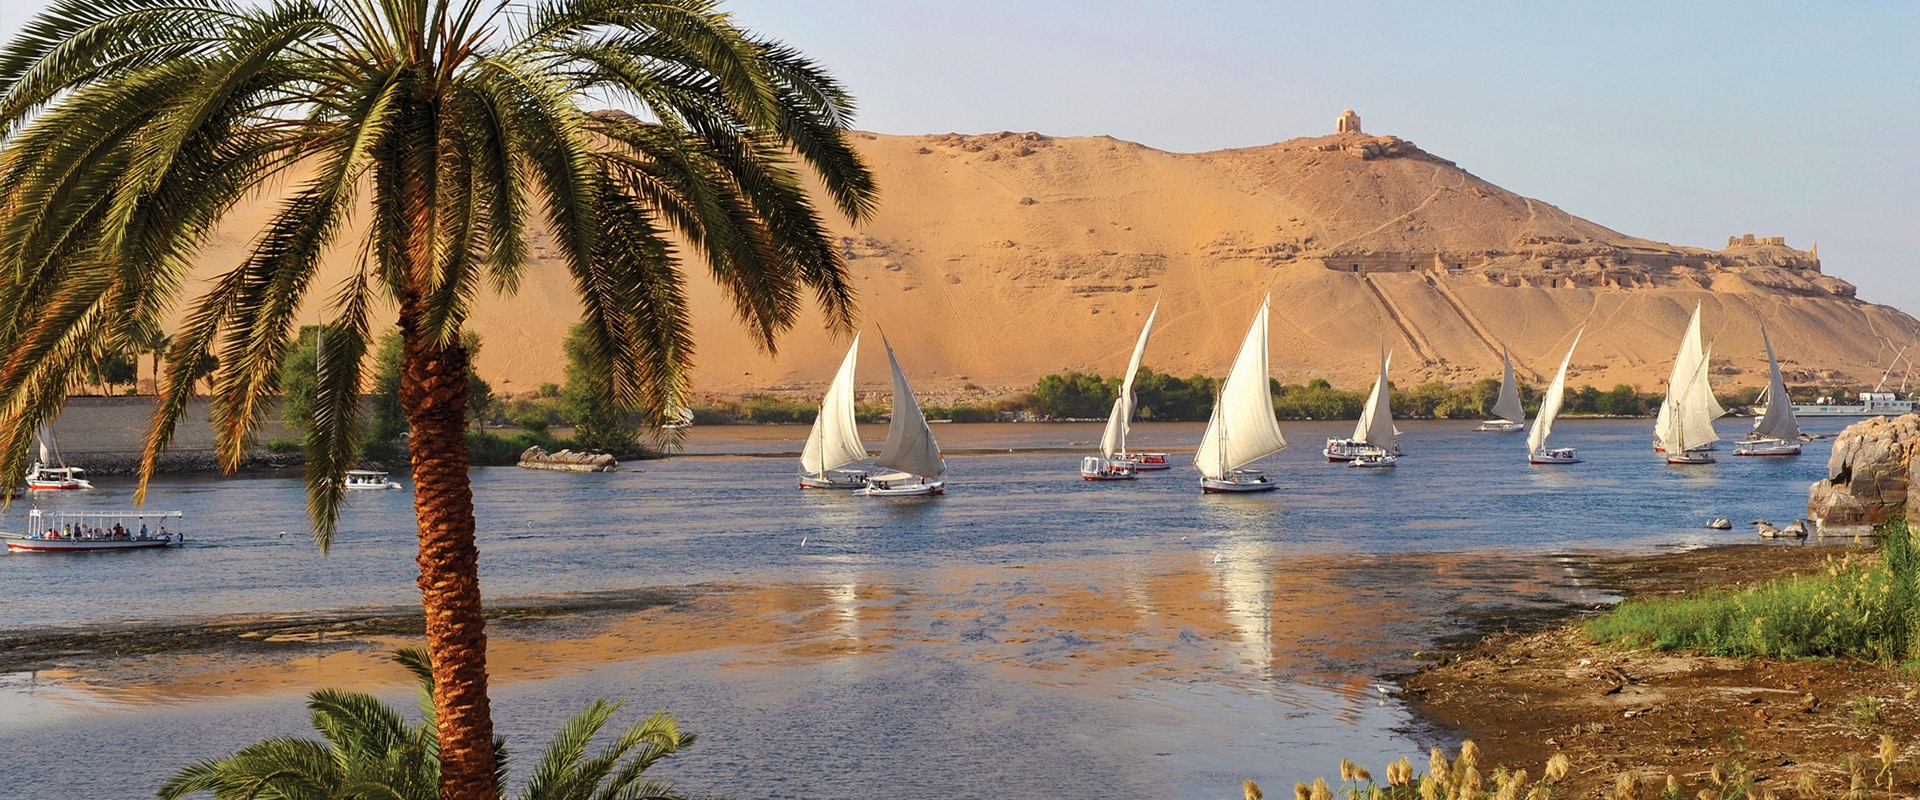 Nile river with Sale Boats, Egypt